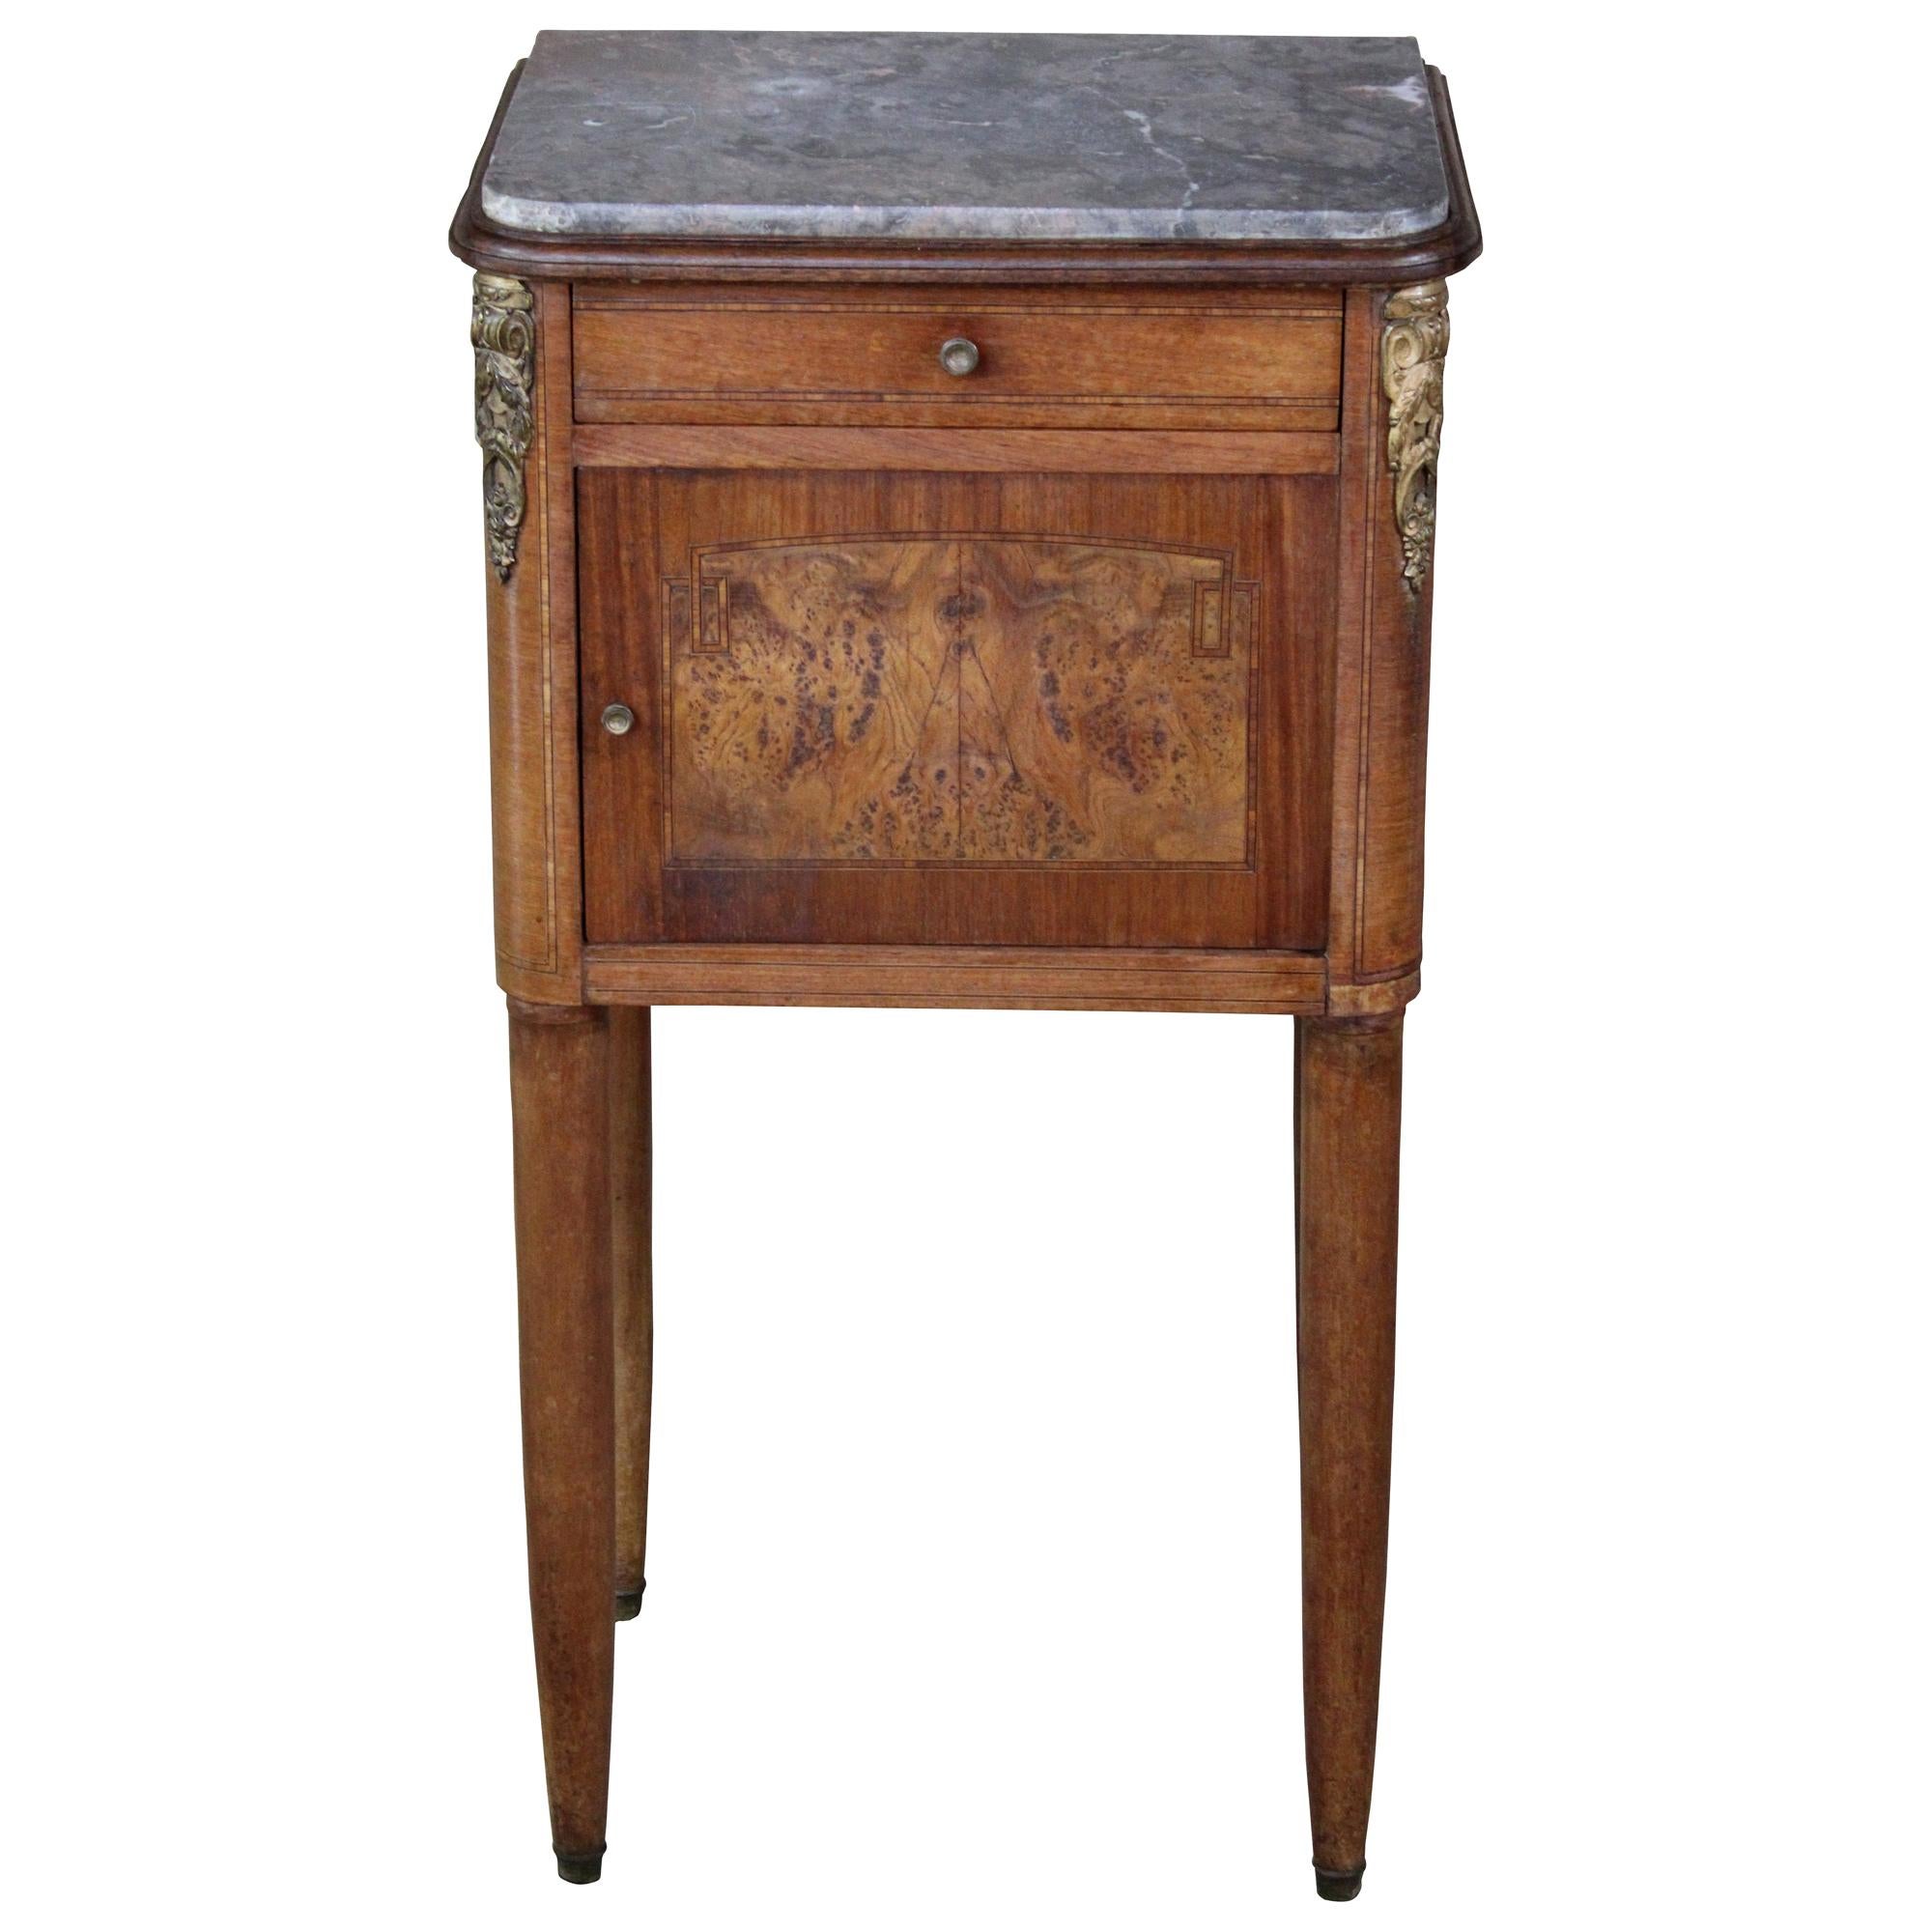 Antique French Walnut Marble Top Tobacco Humidor Stand Cabinet End Table